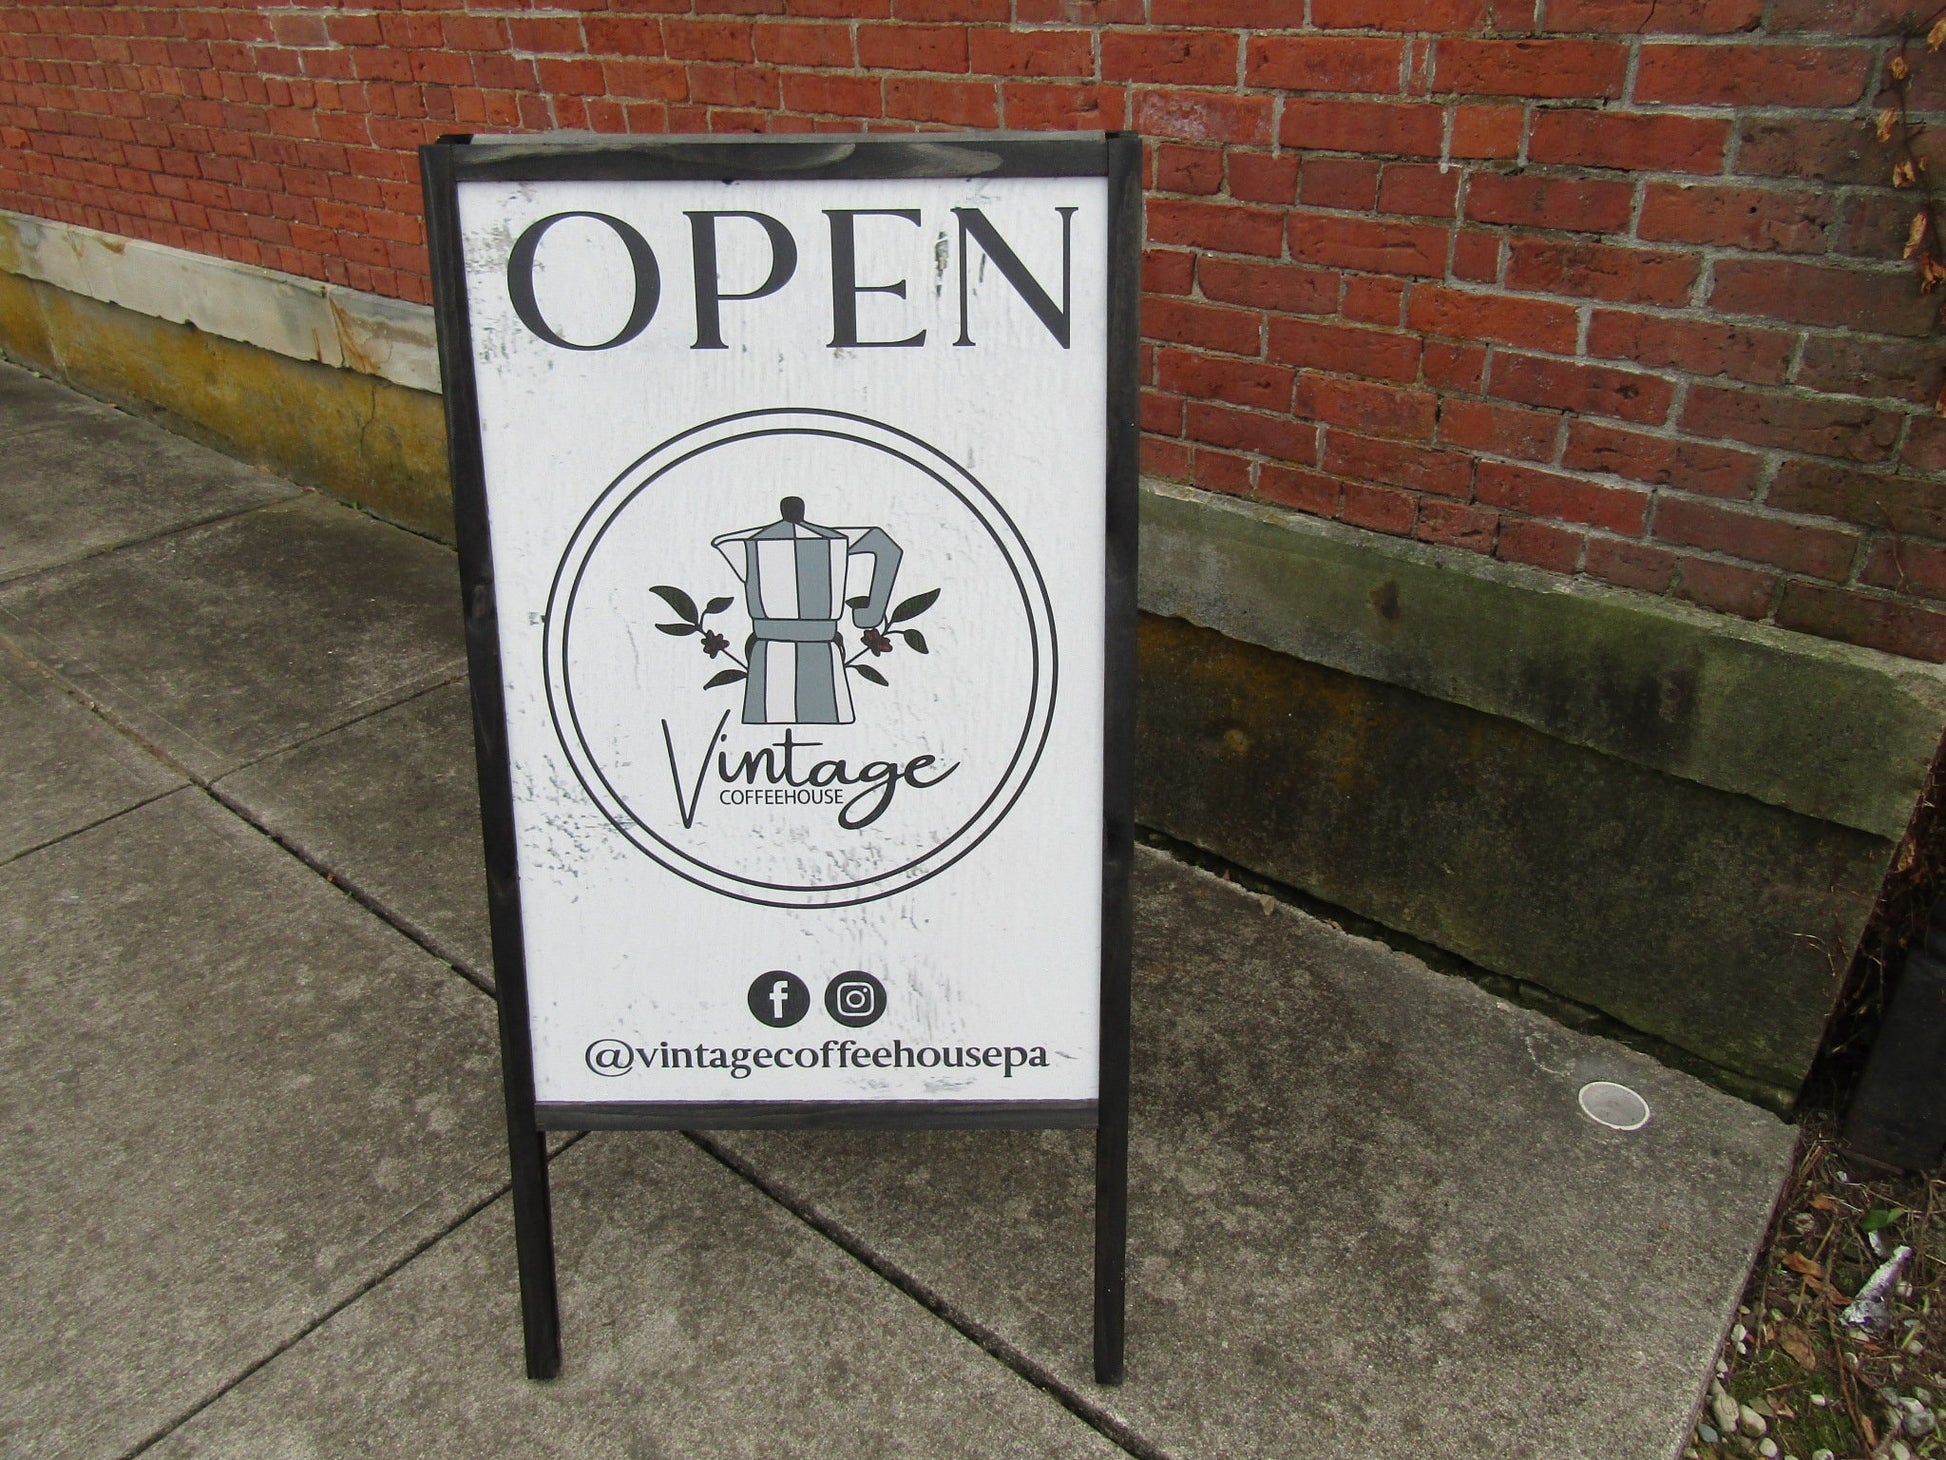 Vintage Coffee Shope Sidewalk Open Welcome Sign Board Walk A frame Free Standing Printed Outdoor Sandwich Board Sign Your logo social media